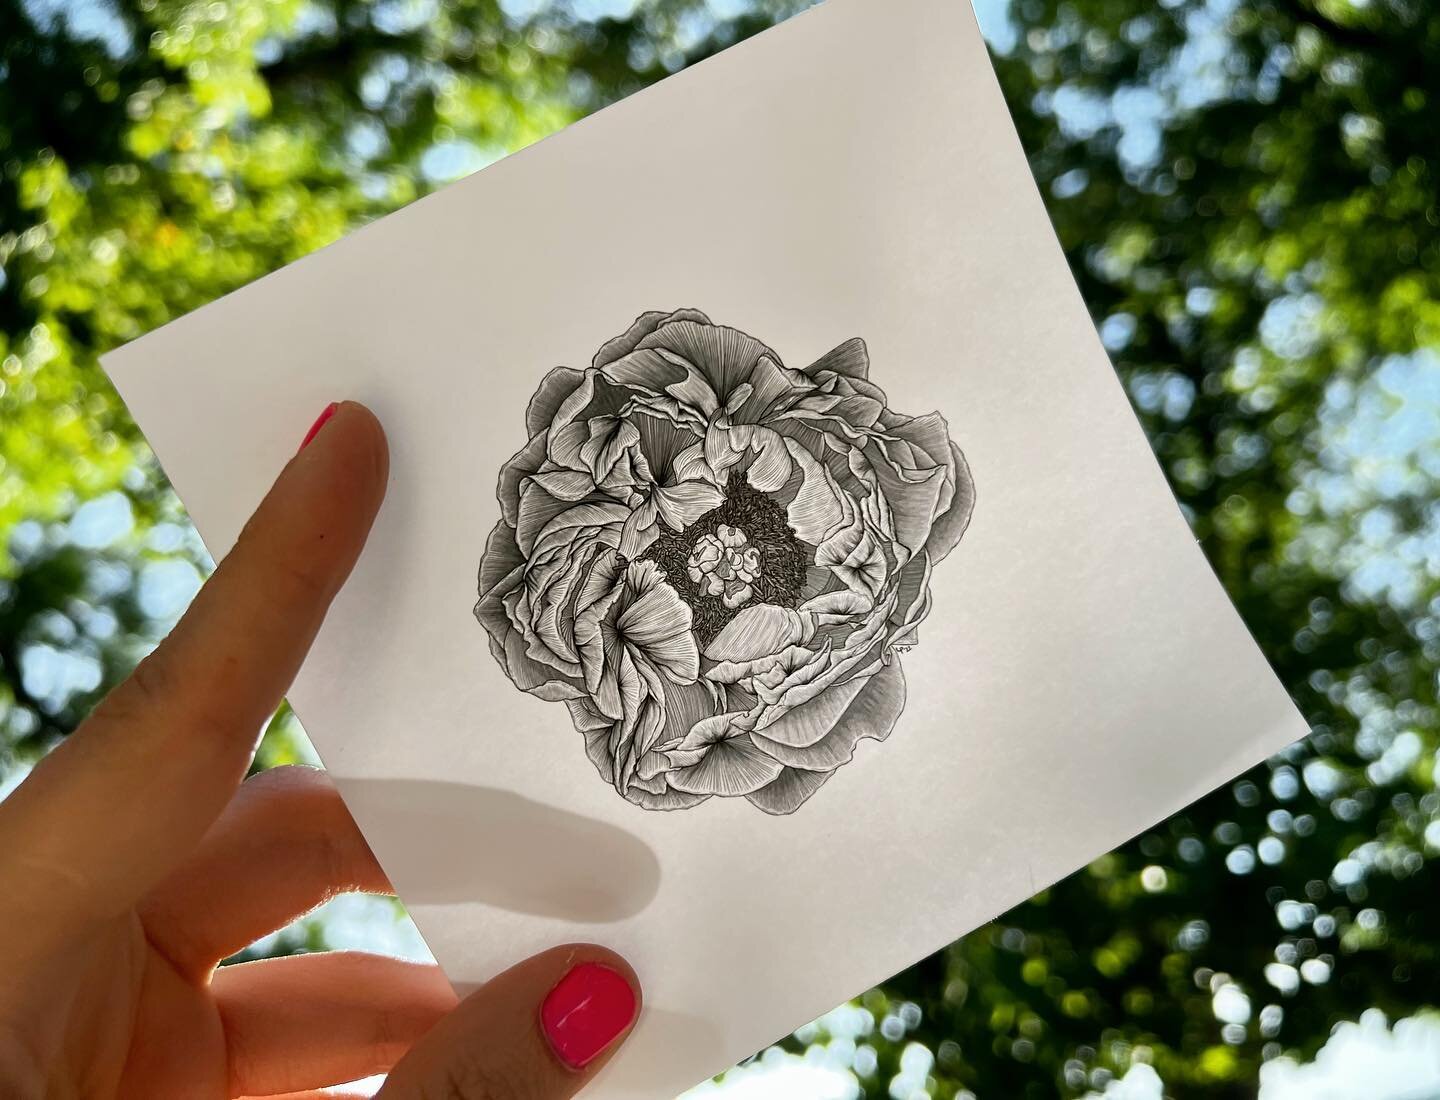 Hip! Hip! Peony prints available now at link in bio! 🌸☀️ 

Grayscale to start.. should I do one in color too?!

Swipe to see the inspo for this latest addition to our floral gallery, original snap taken at @londonplaneseattle 😍 

Prices include tax